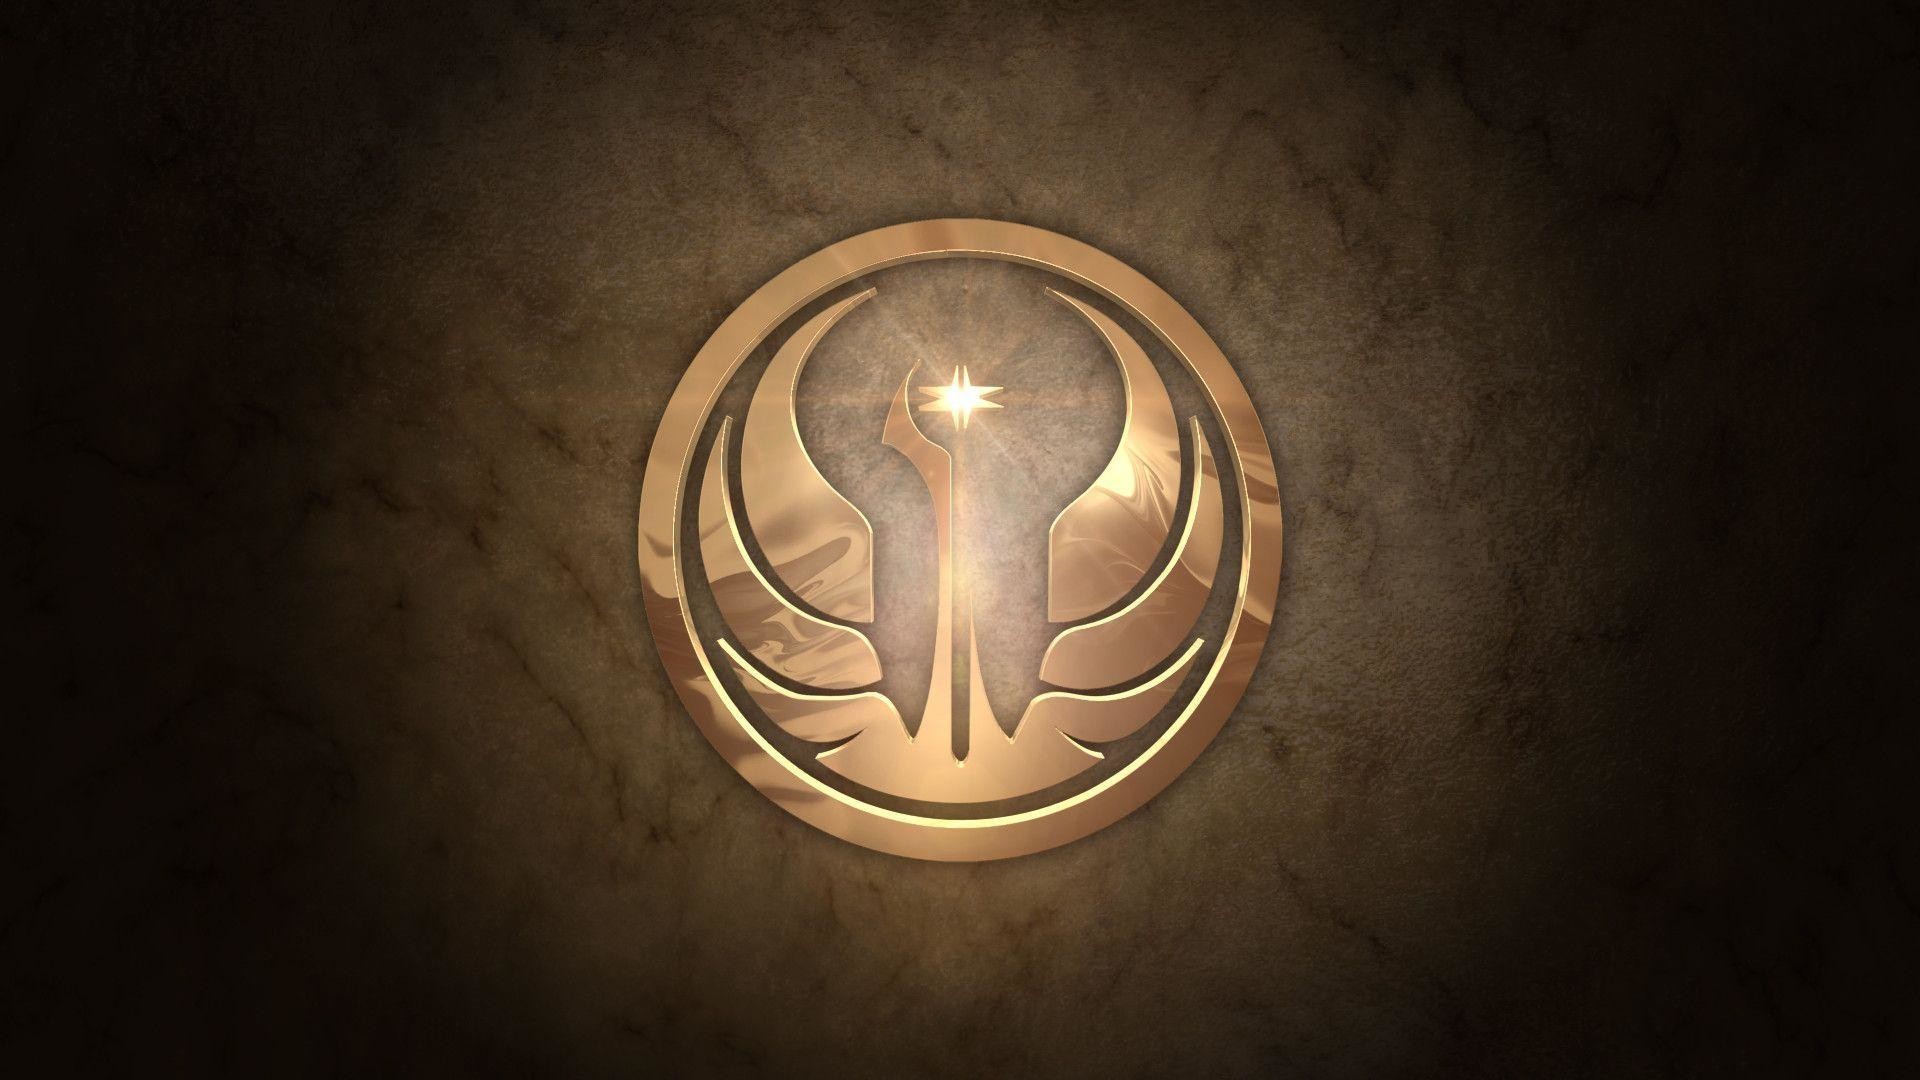 Sat 25 Apr 2015 <b>Swtor HD Backgrounds</b> for <